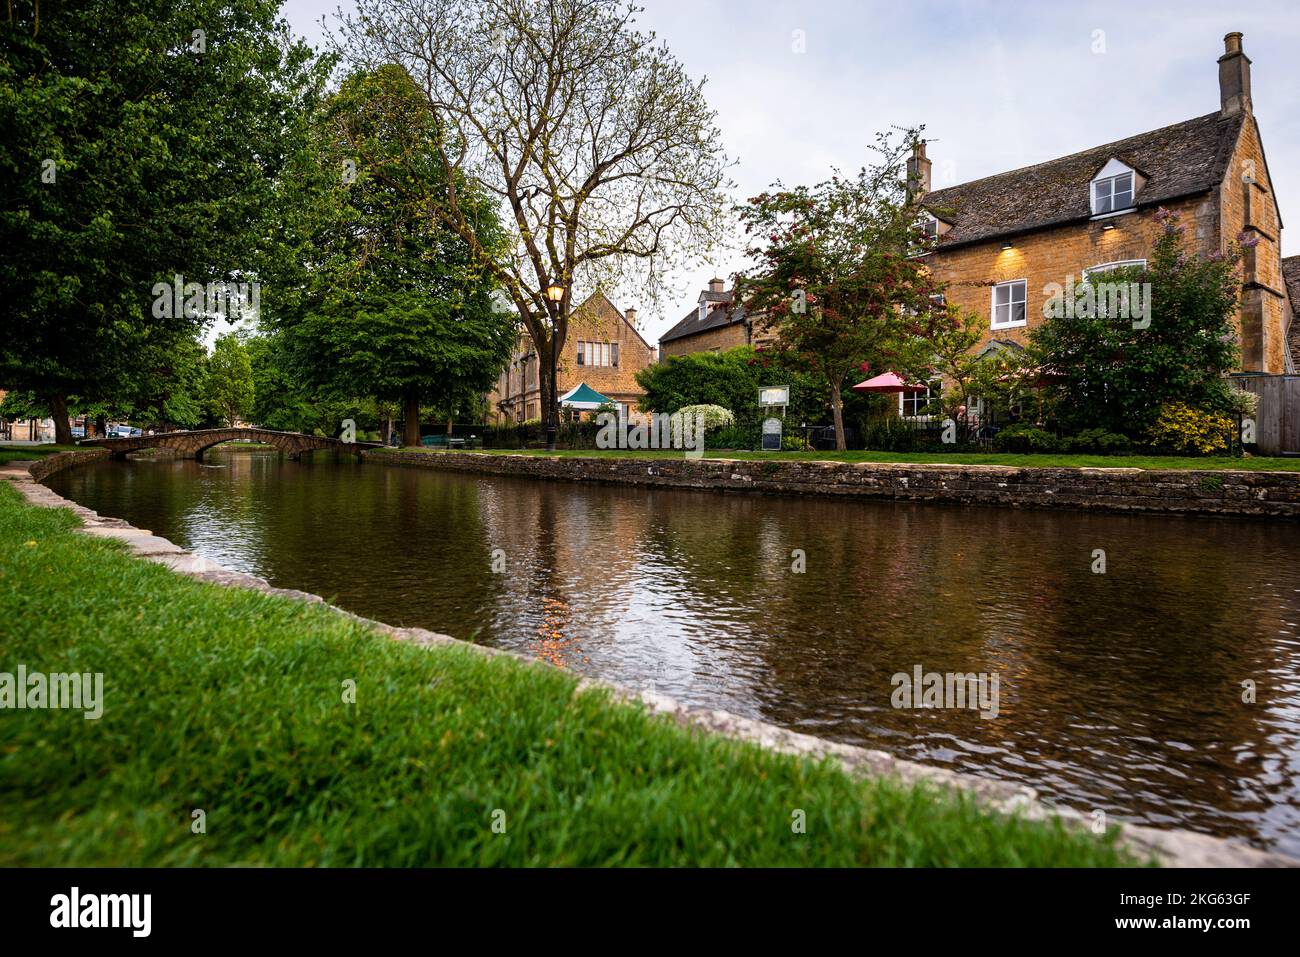 River Windrush and low arched stone pedestrian bridges in Bourton-on-the-Water in the Cotswolds, England. Stock Photo